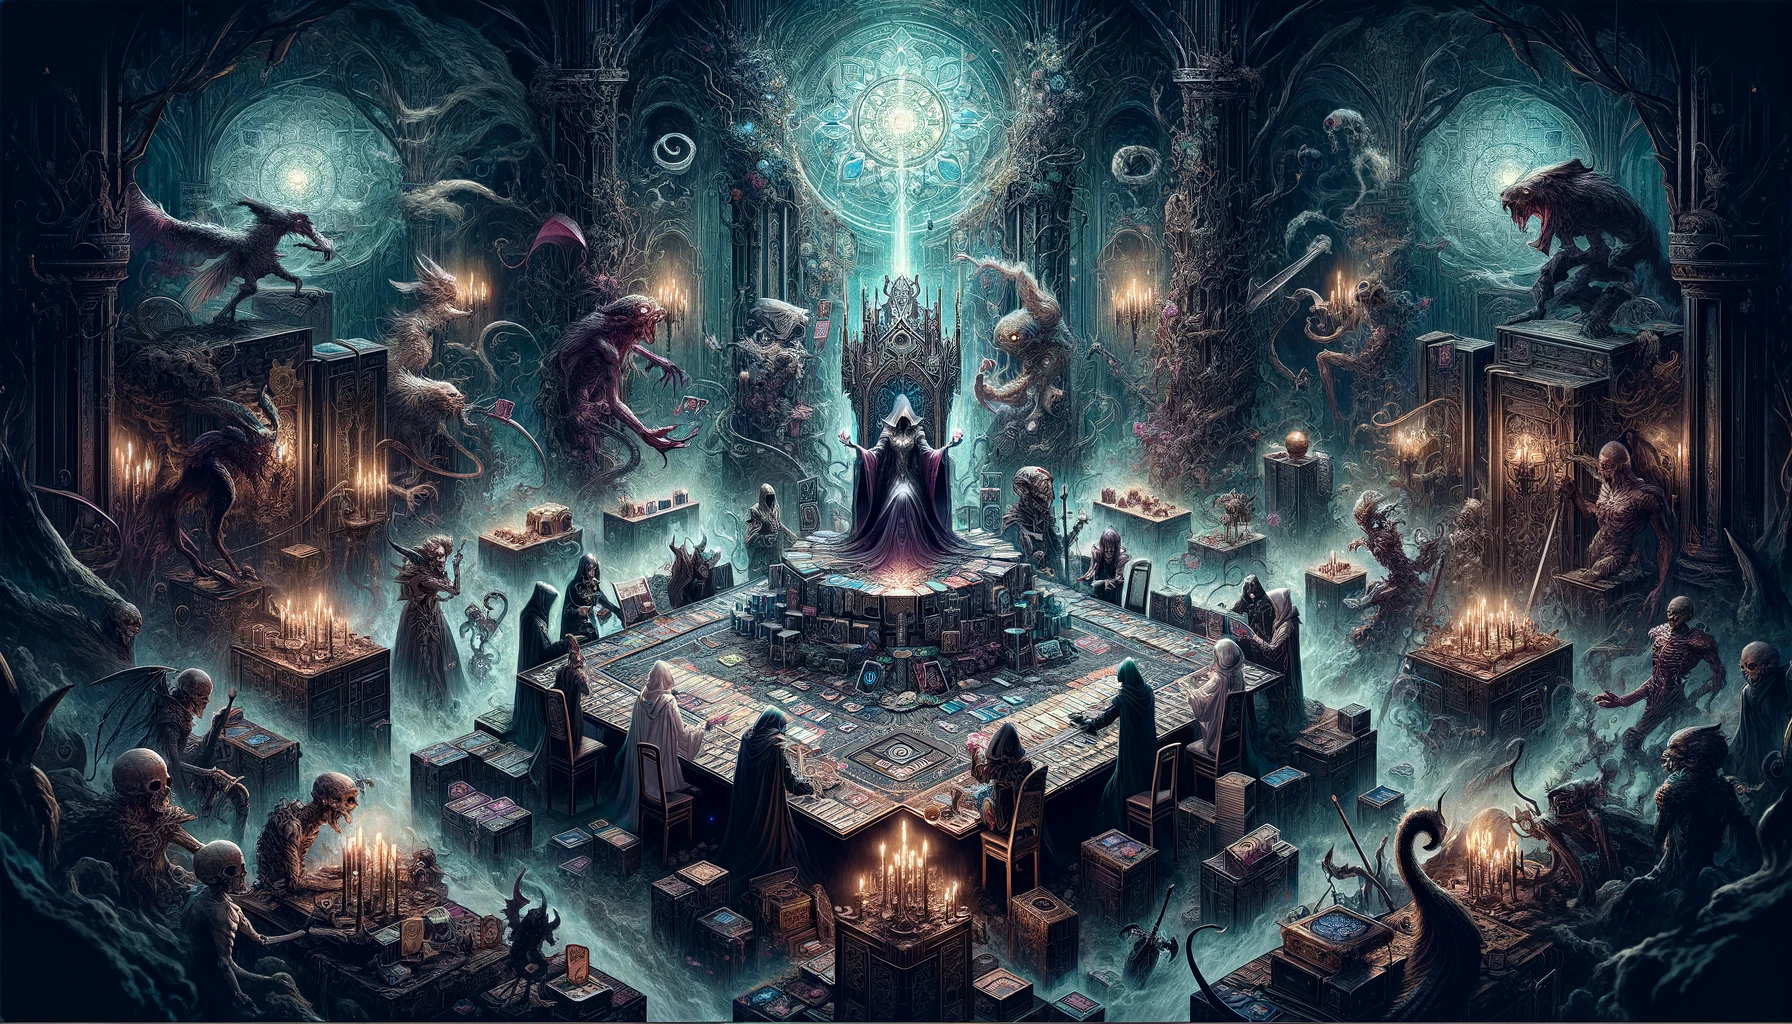 A wide-format illustration in a dark fantasy style, featuring a Pool 1 card game setup with detailed characters and creatures around a mystical altar. Brightness is added to the details, making the elements more vivid and prominent.